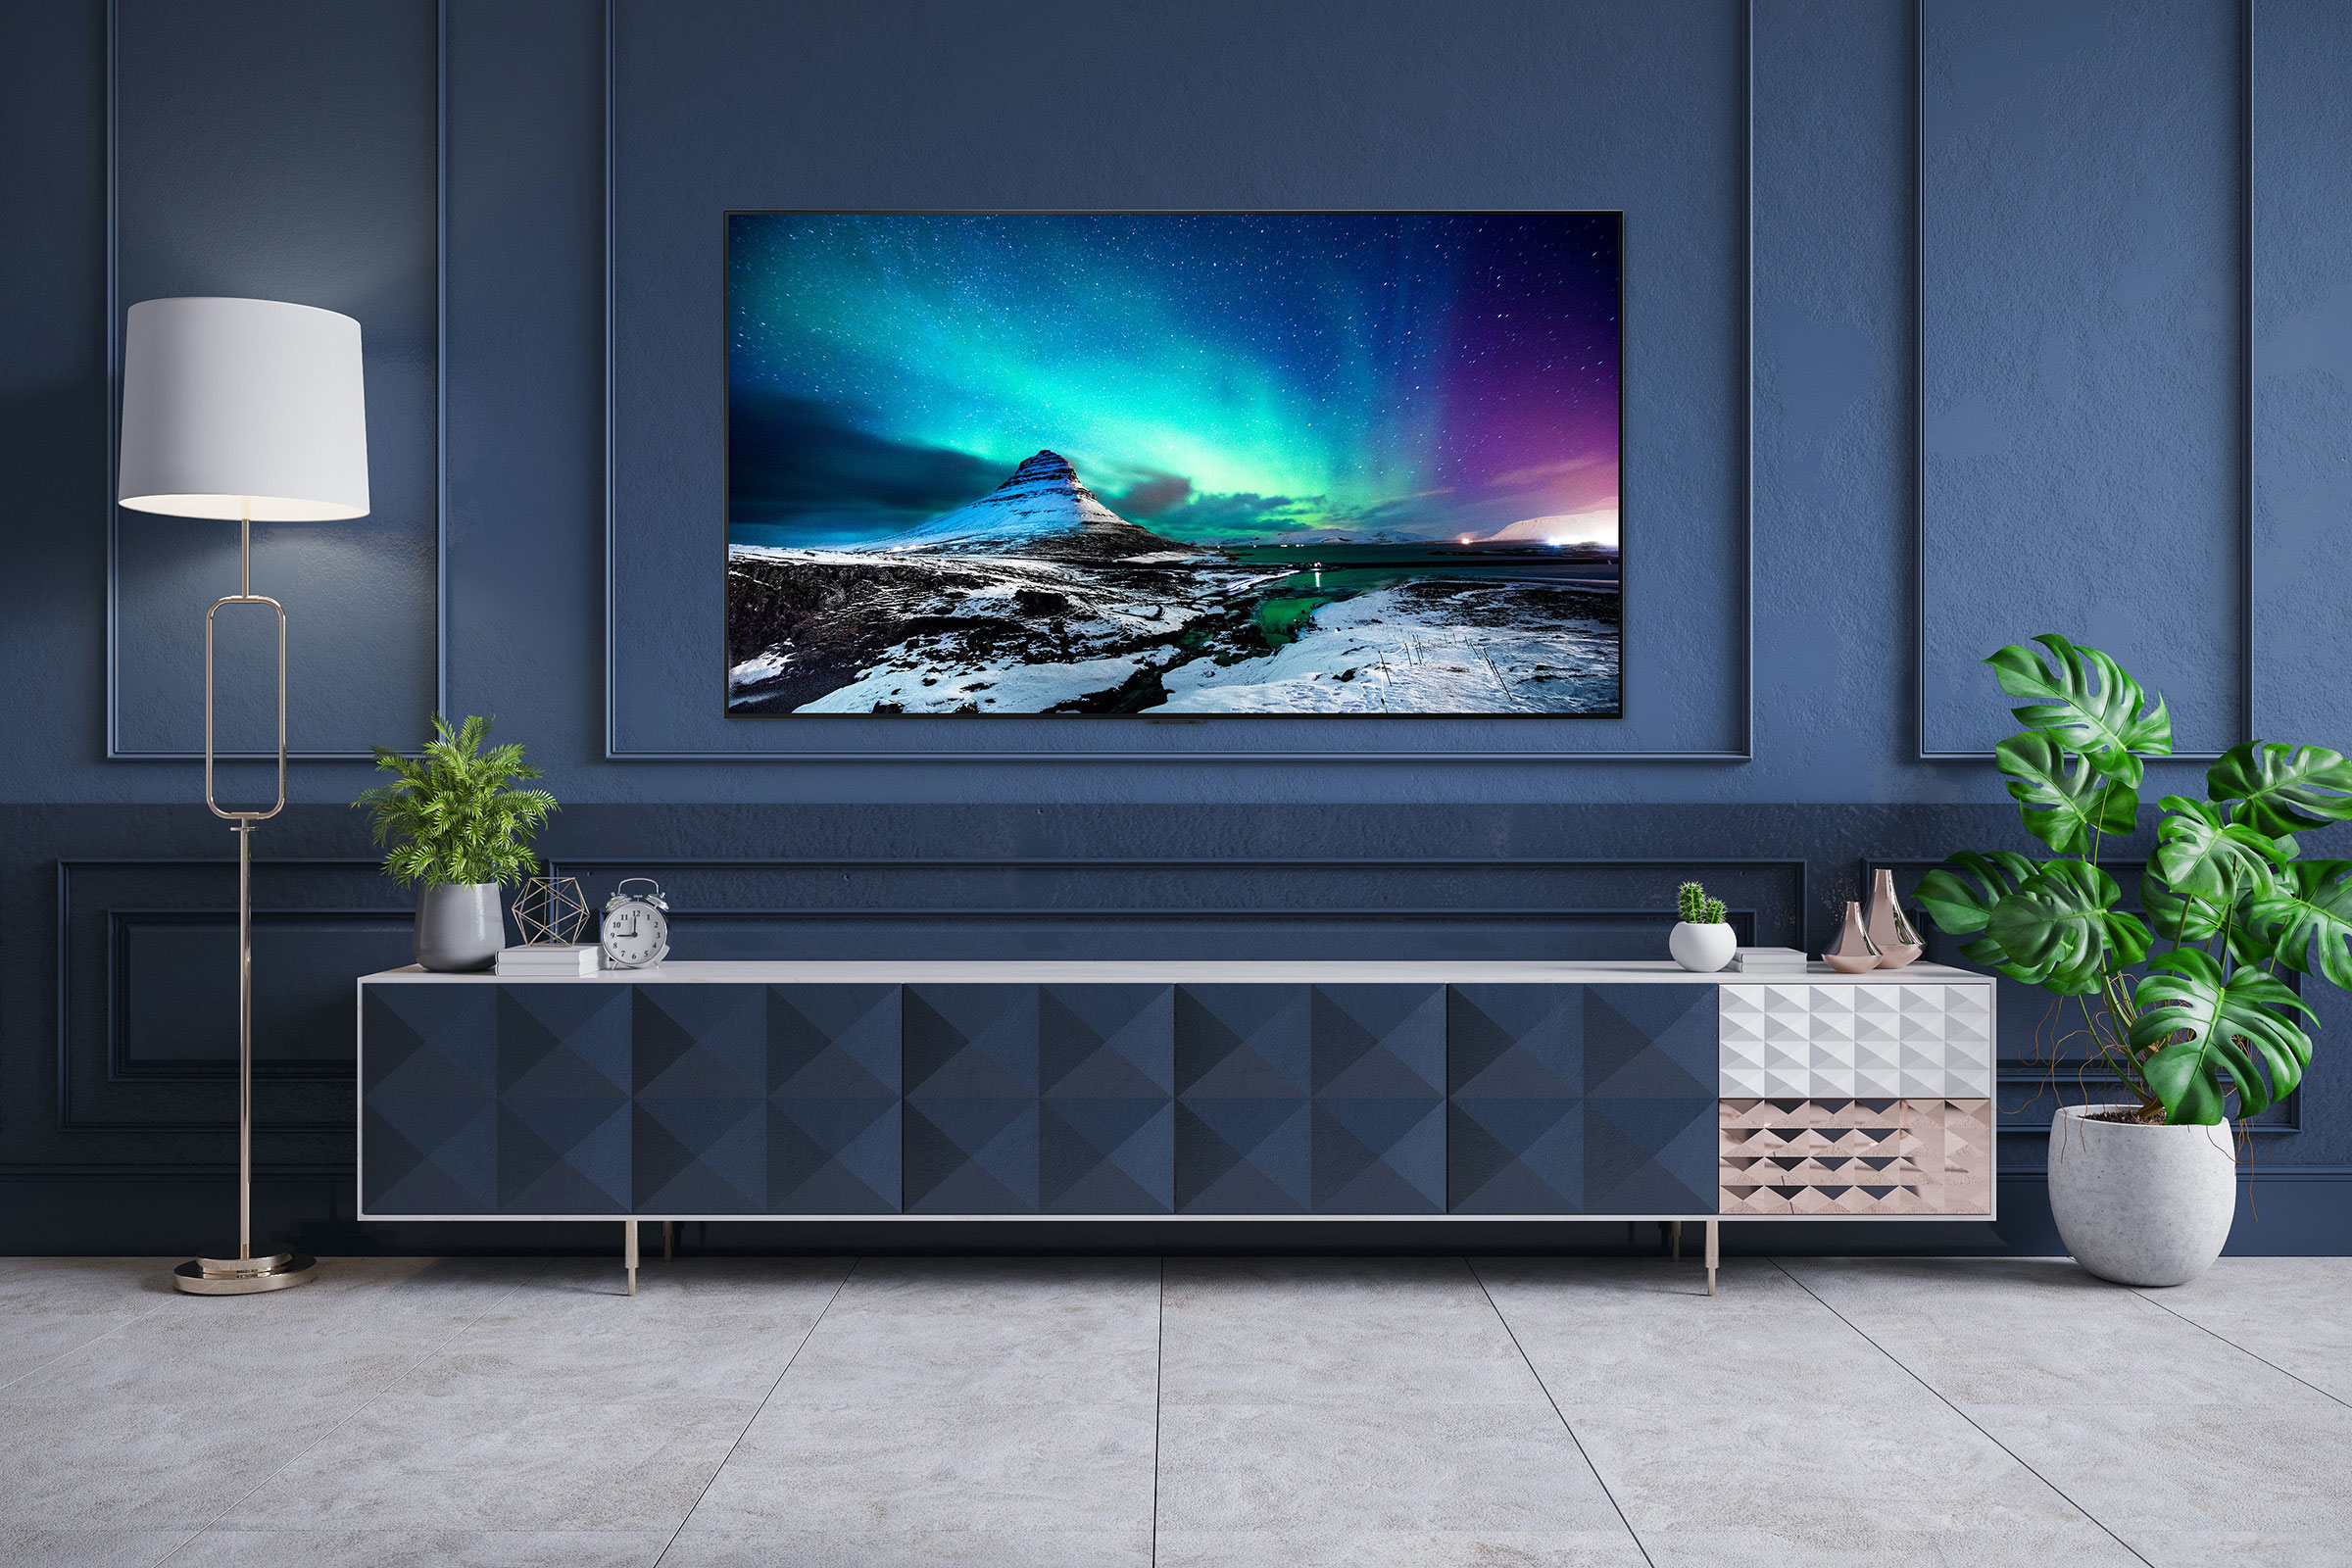 Best Inventions 2021 / Special Mentions: LG G-series OLED evo 4K Gallery TV